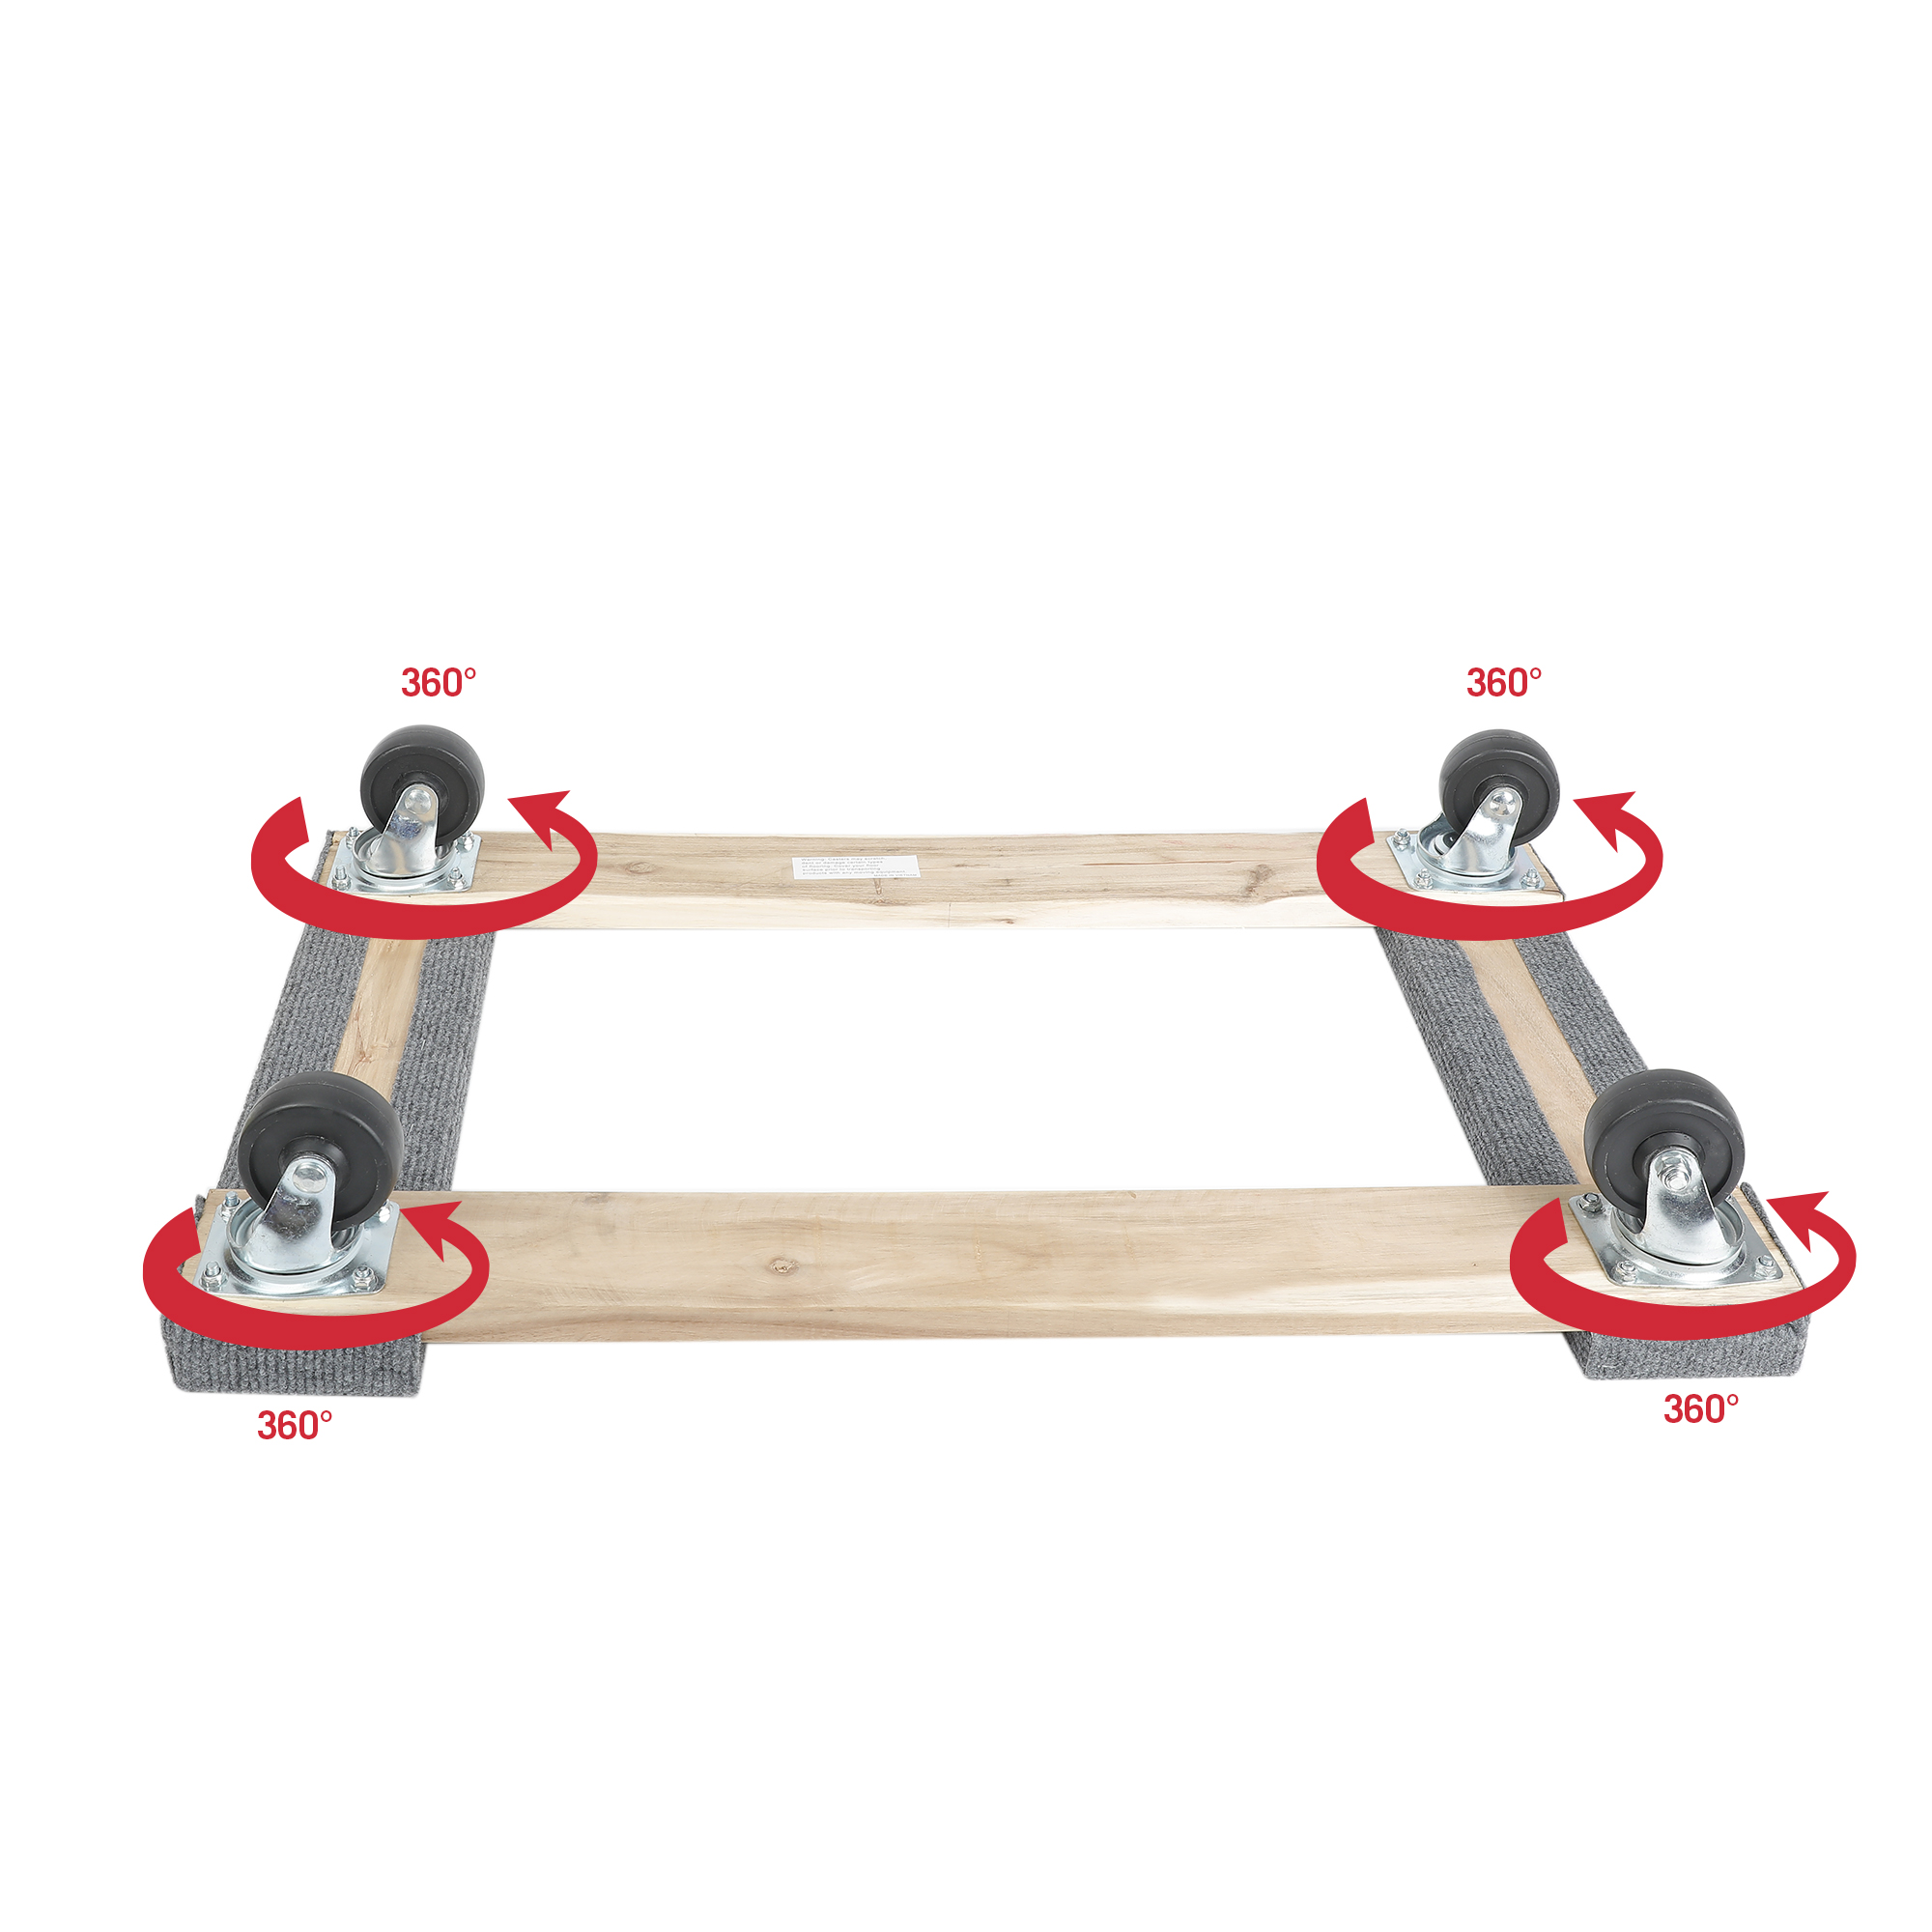 Hyper Tough 30” Wooden Moving Dolly, 660-lb Capacity, Dollies - image 5 of 9